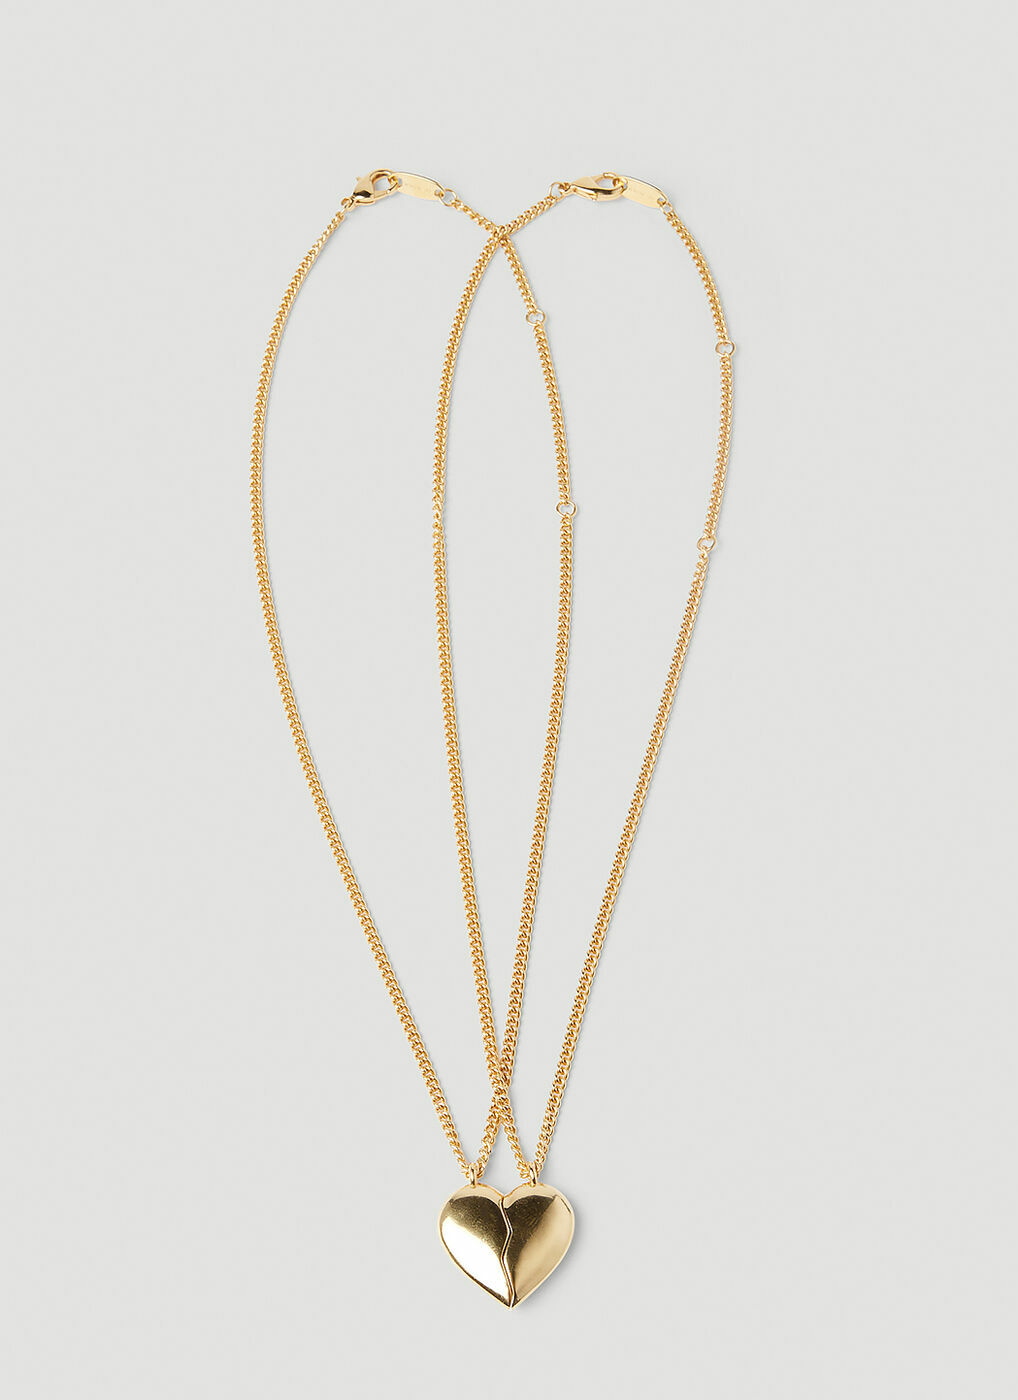 Lovelock Double Embellished Necklace in Gold - Balenciaga